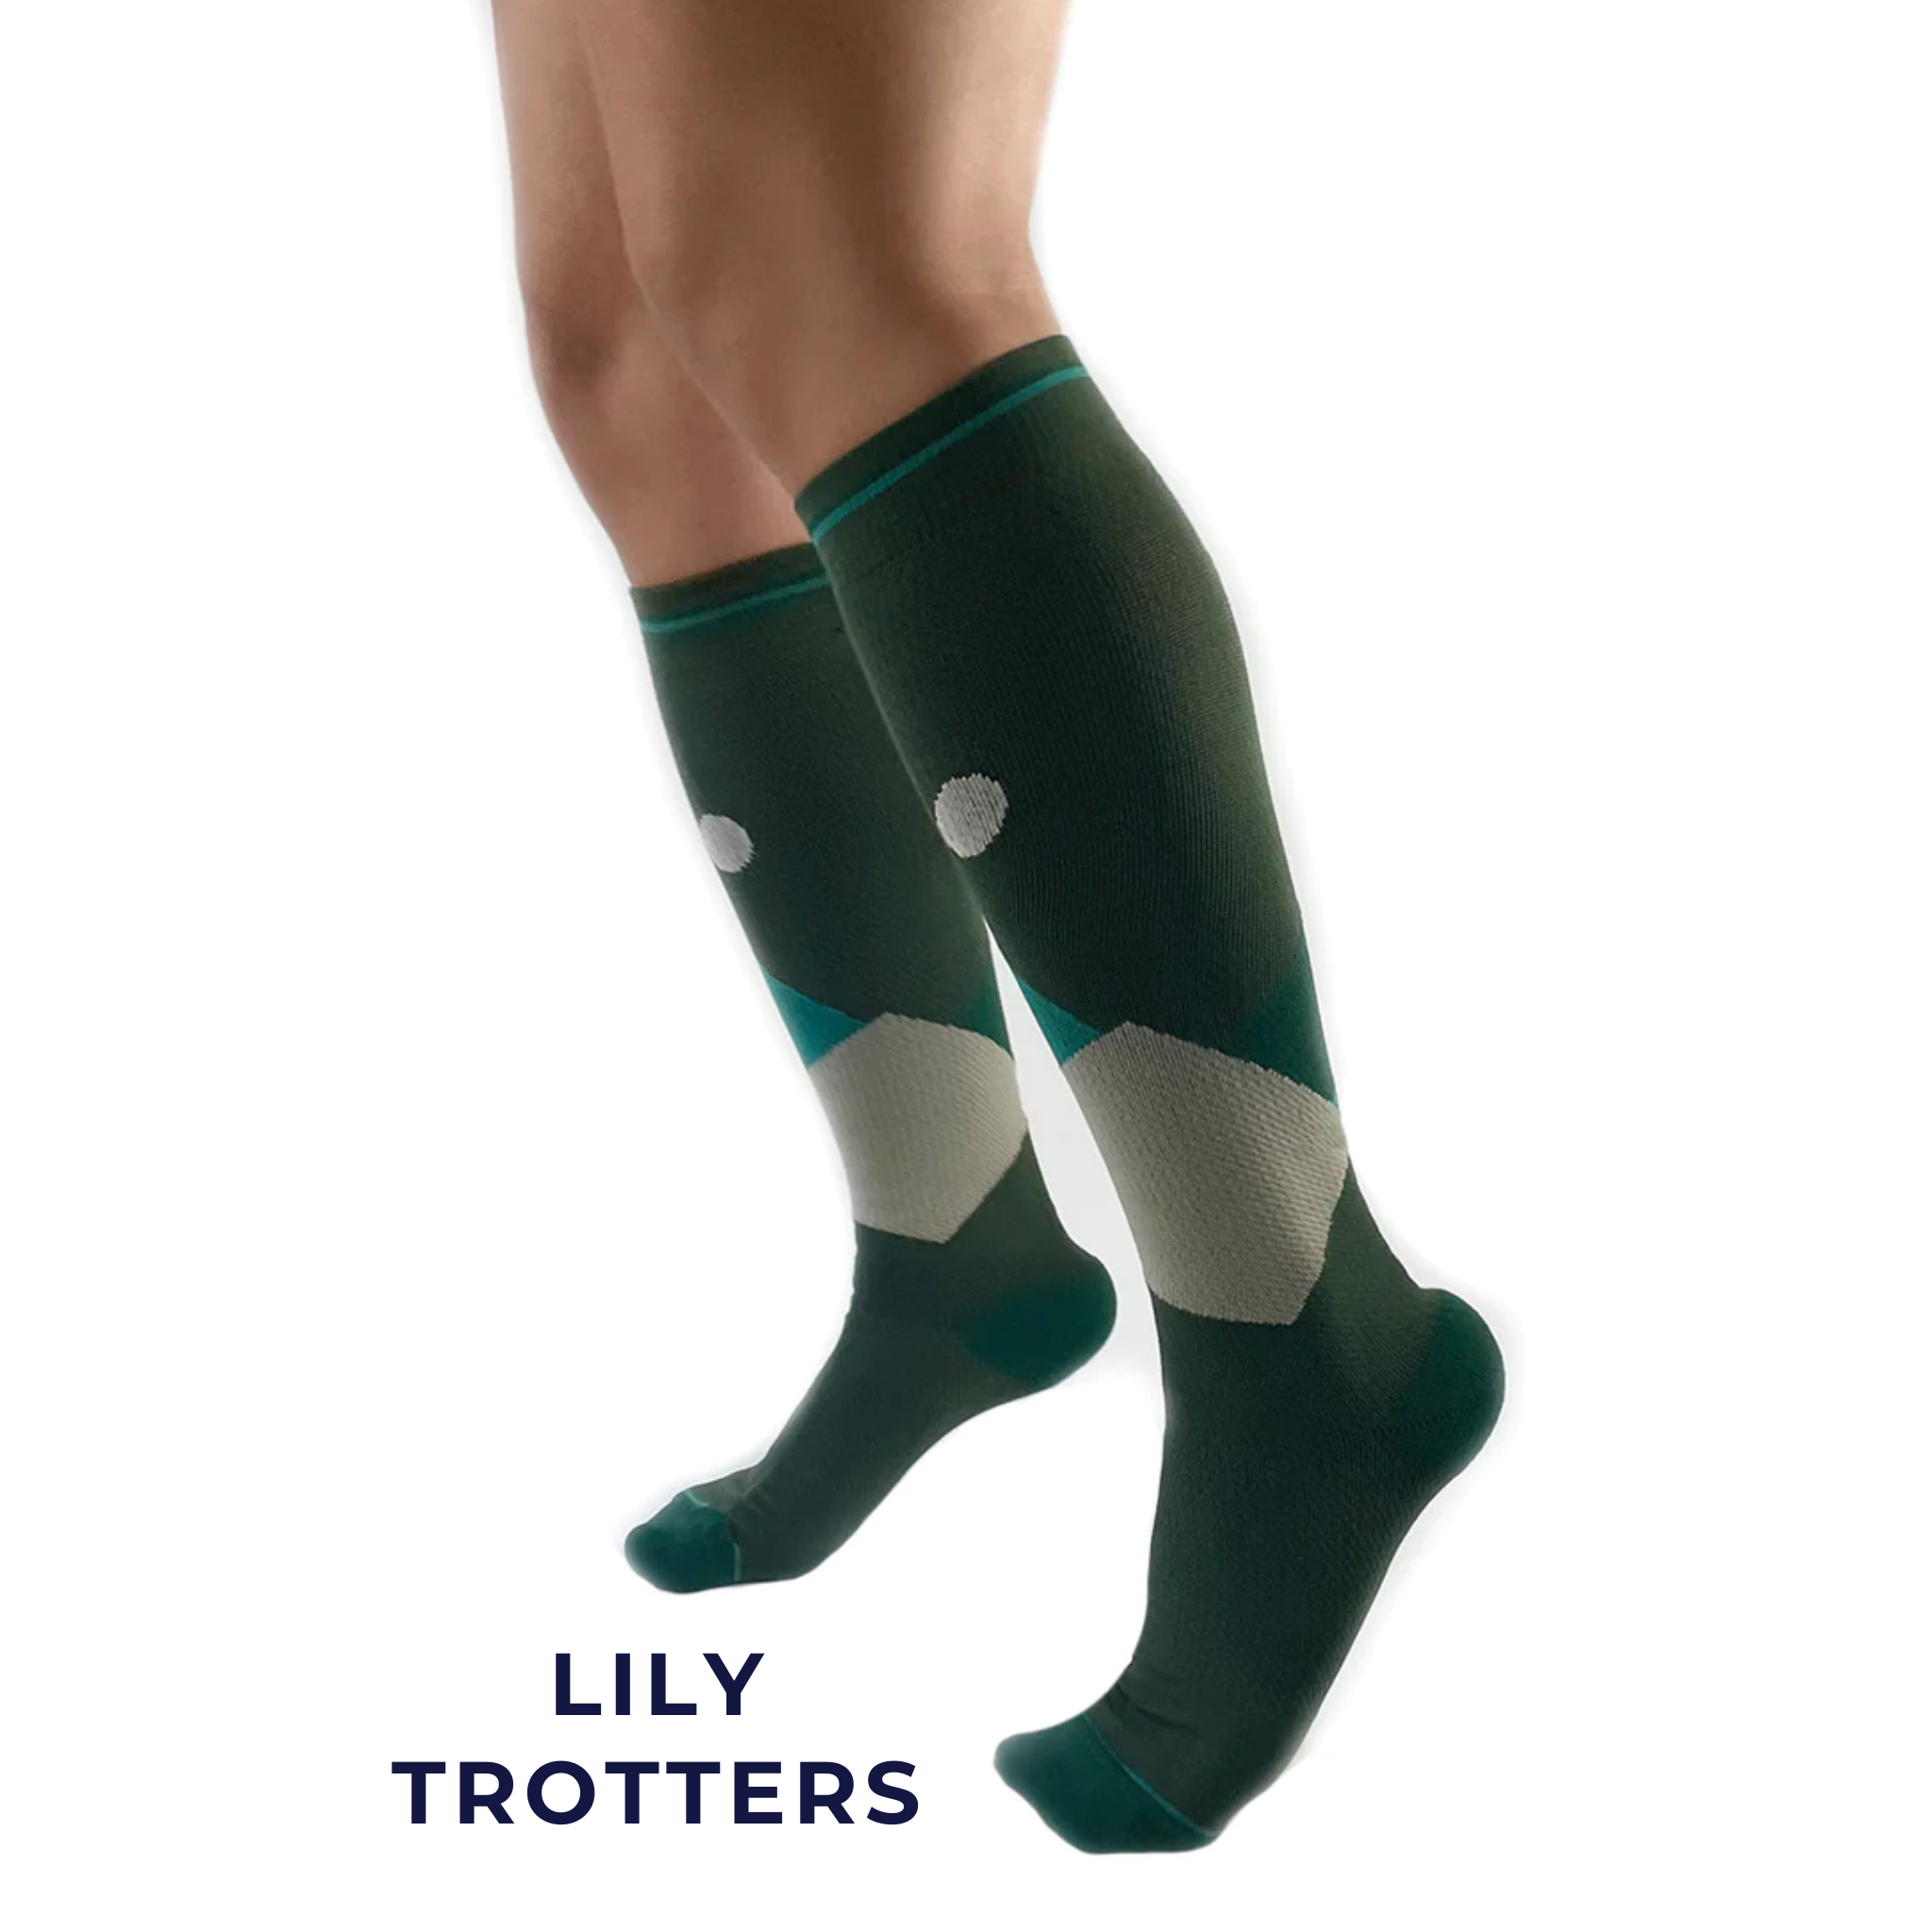 Lily Trotters